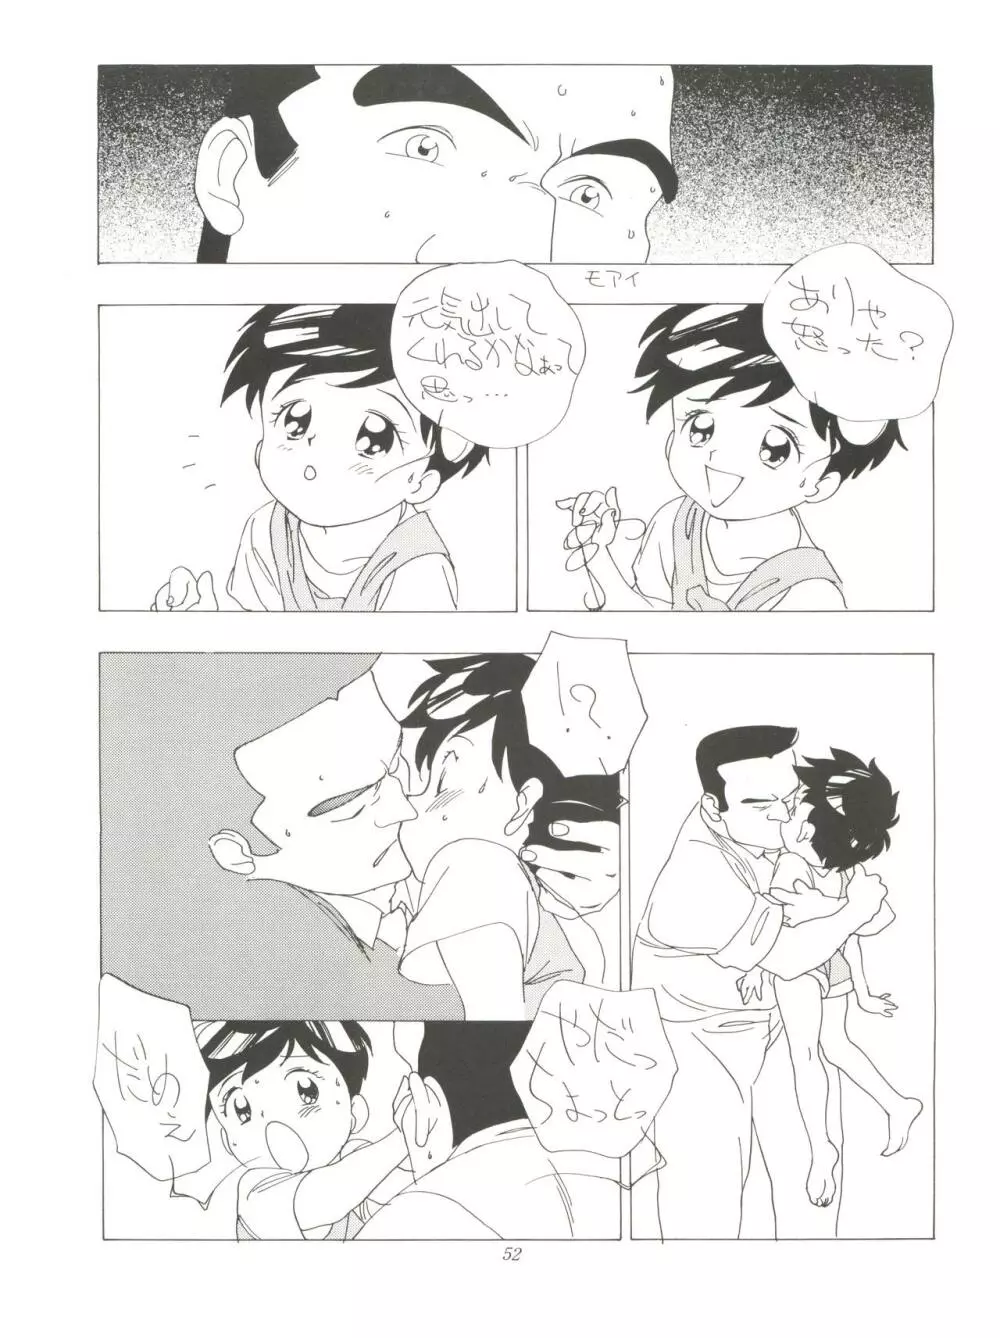 FLY! ISAMI!! - page56